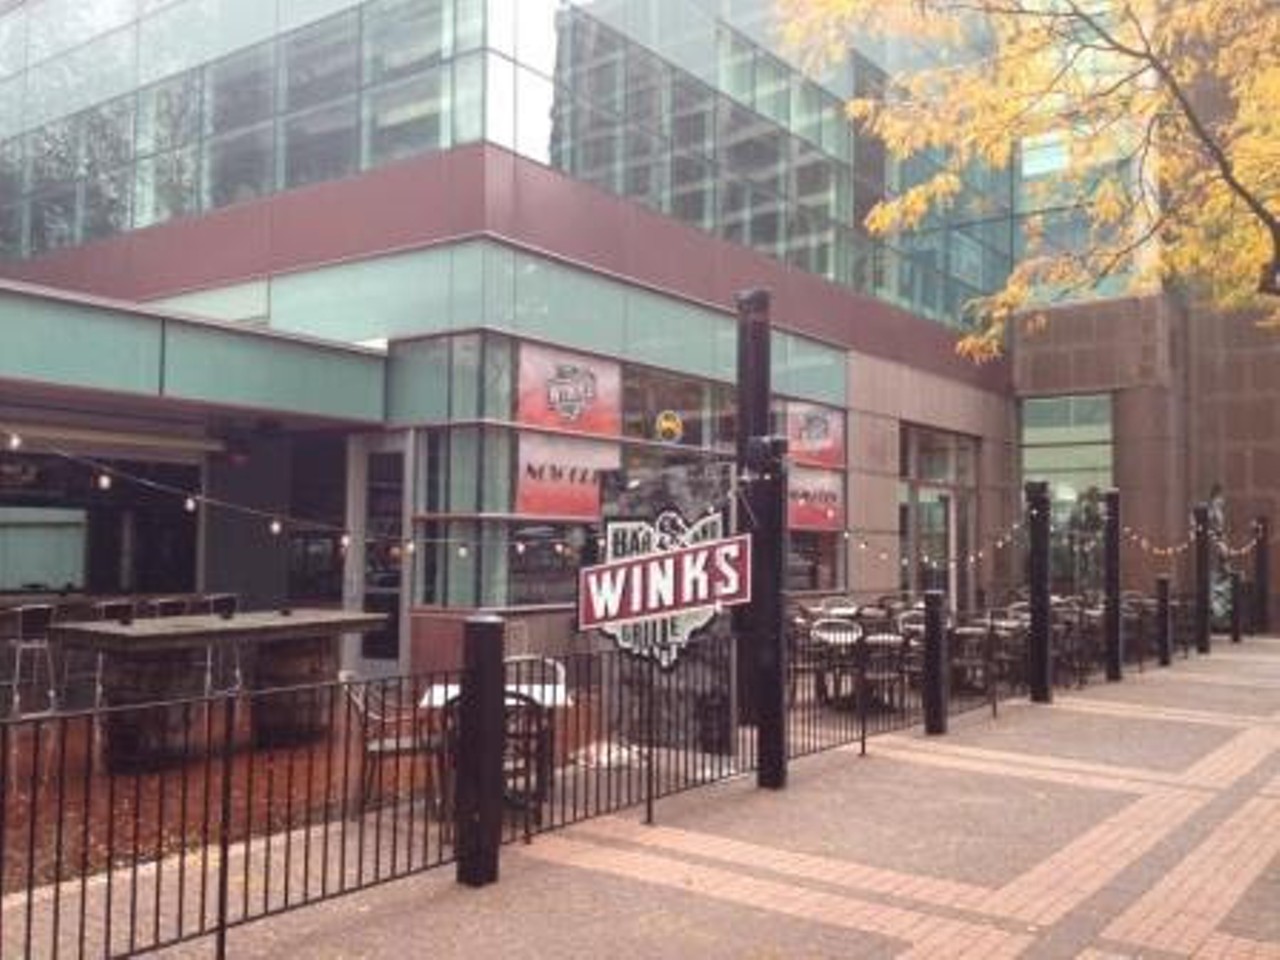 Located on the outside of the Galleria Mall on East 9th, this locale is perfectly positioned to catch those folks to and fro the game without being in the "lion's den."